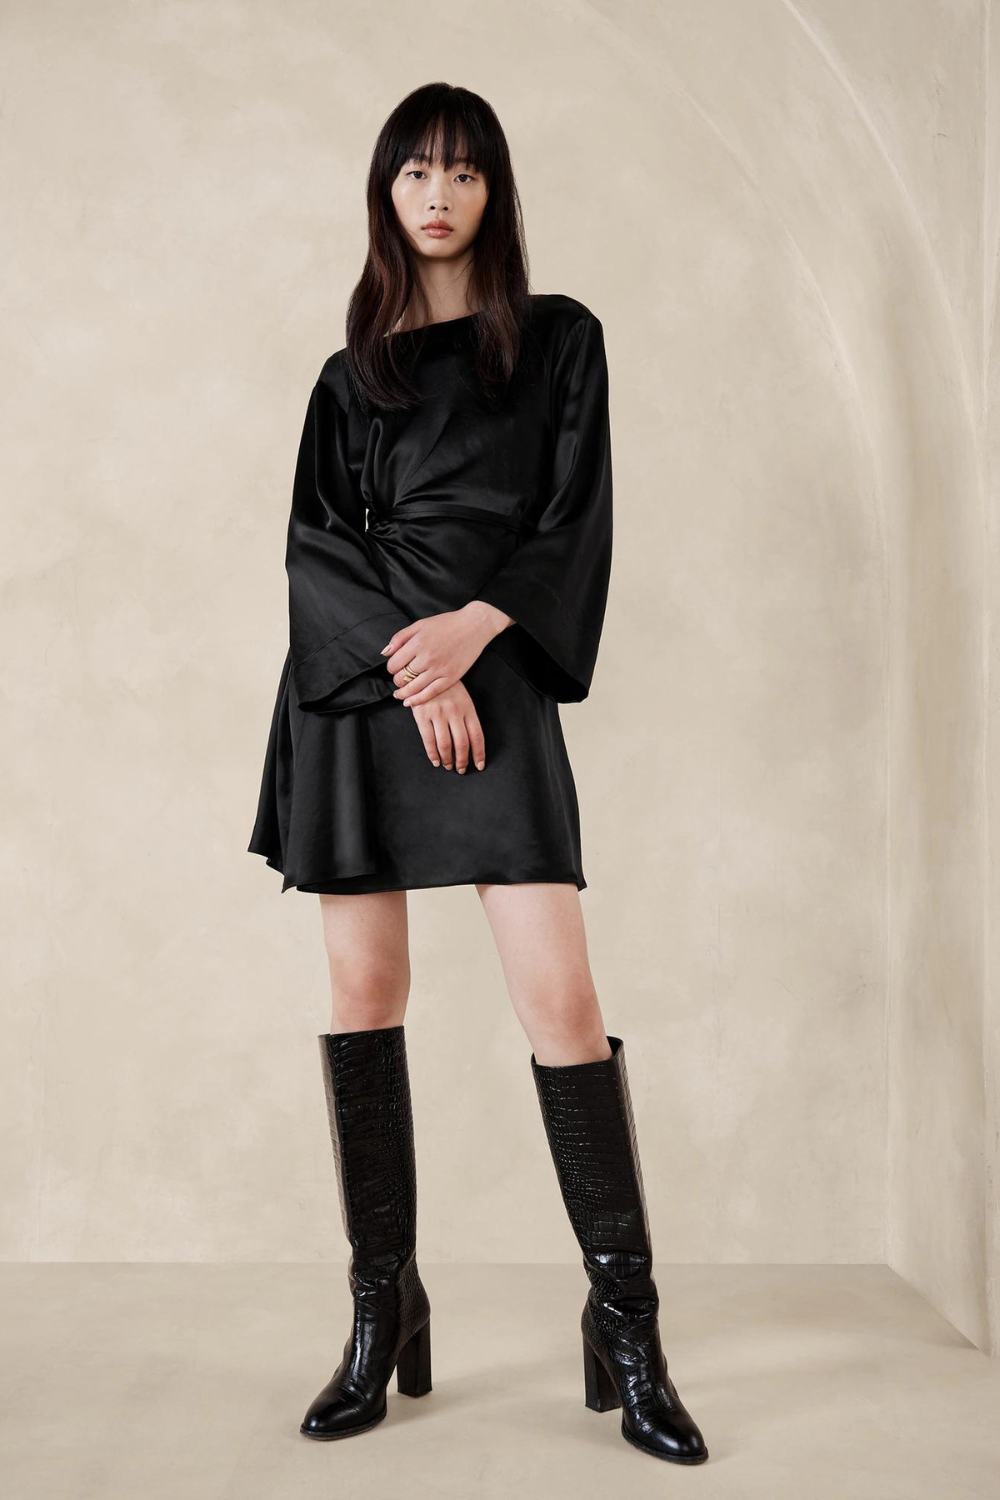 Bar outfit for ladies - Satin Dress and Knee High Boots